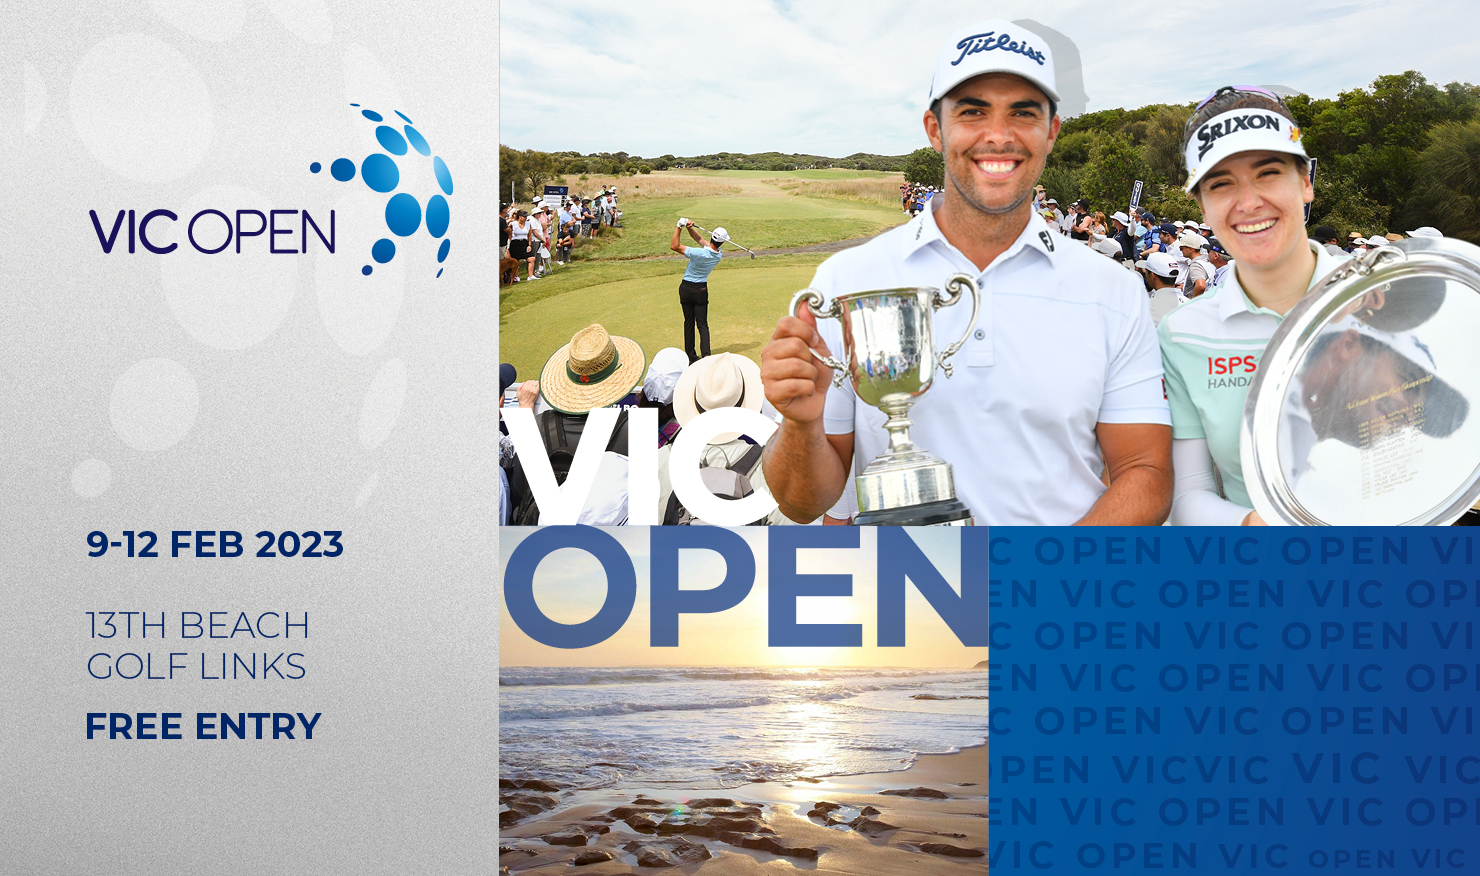 13th Beach gets another 2 years of Vic Open Golf Australia